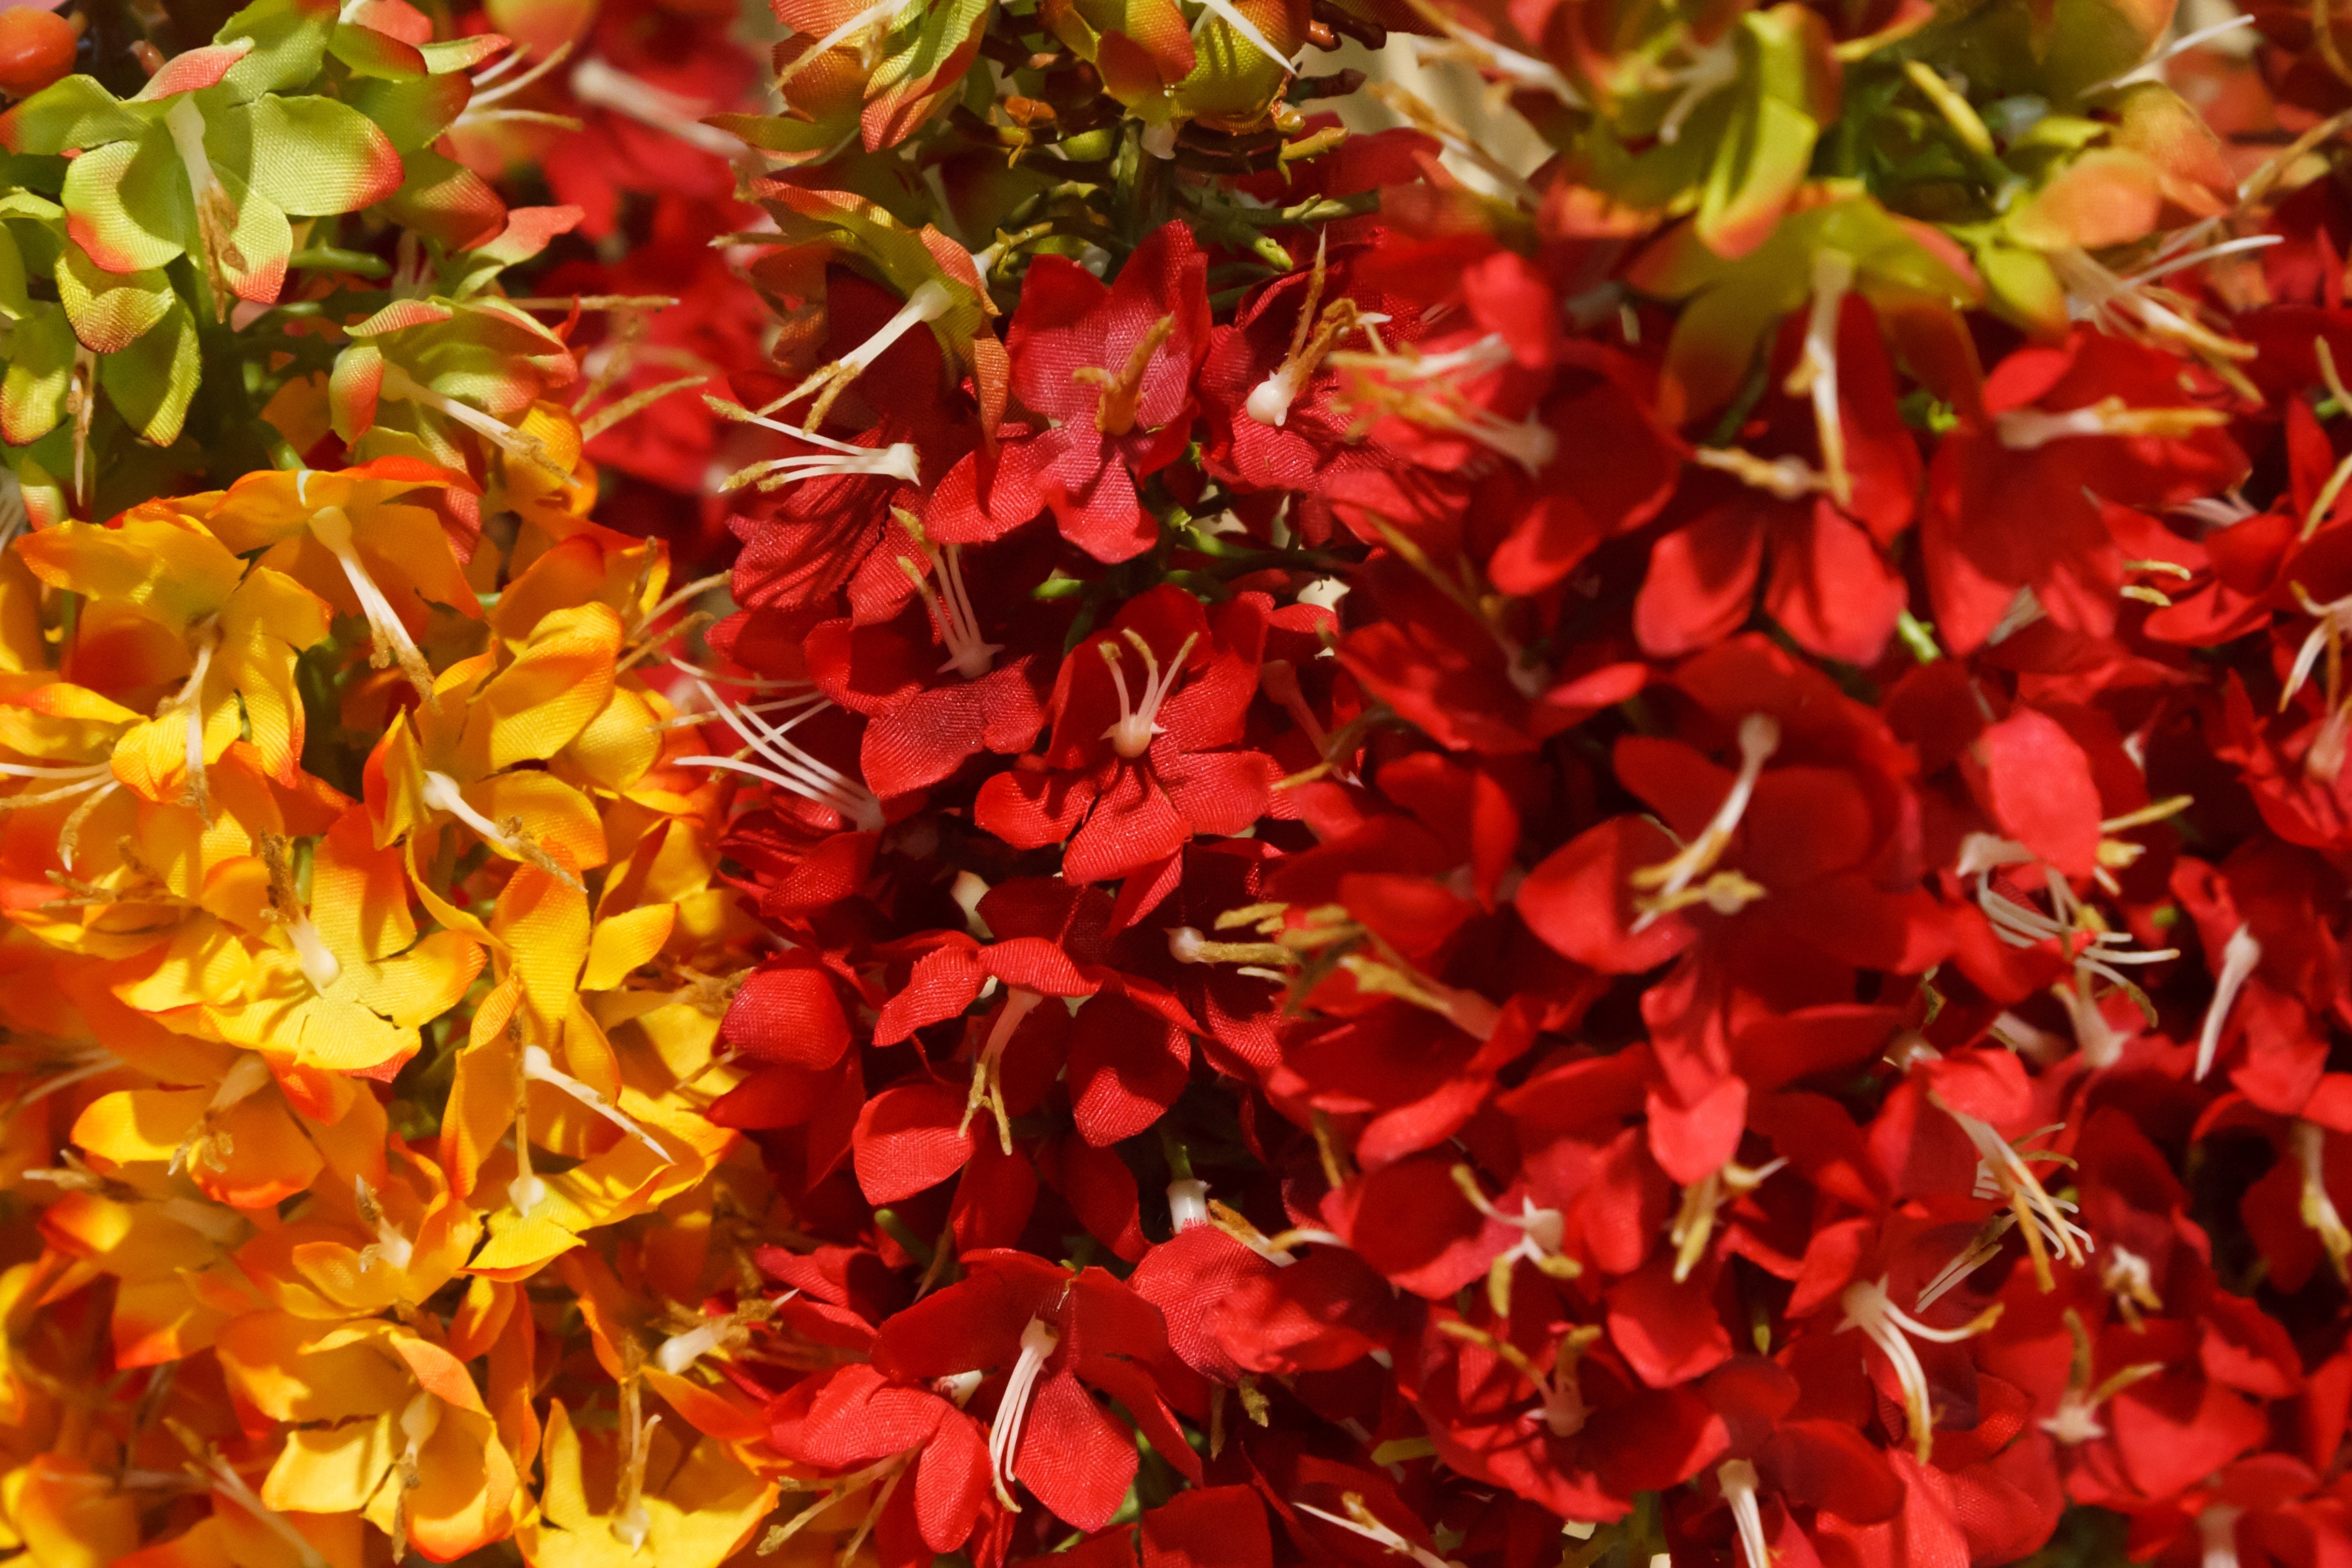 bunch of red and yellow petaled flowers